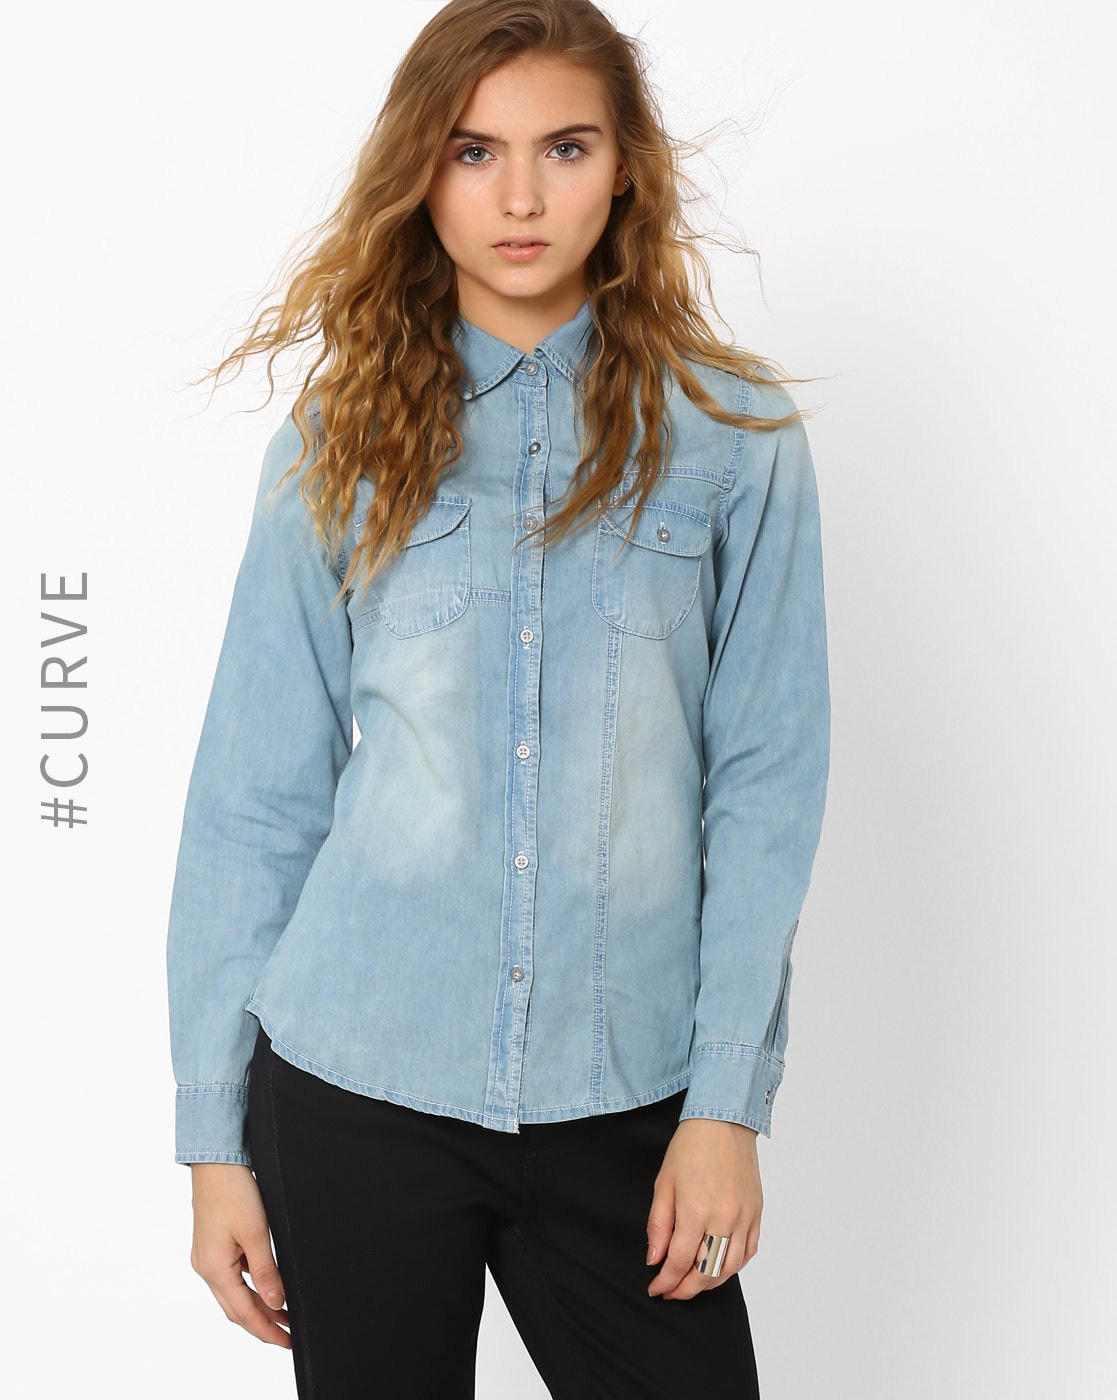 Pepe Jeans Women Washed Casual Light Blue Shirt - Buy Pepe Jeans Women  Washed Casual Light Blue Shirt Online at Best Prices in India | Flipkart.com